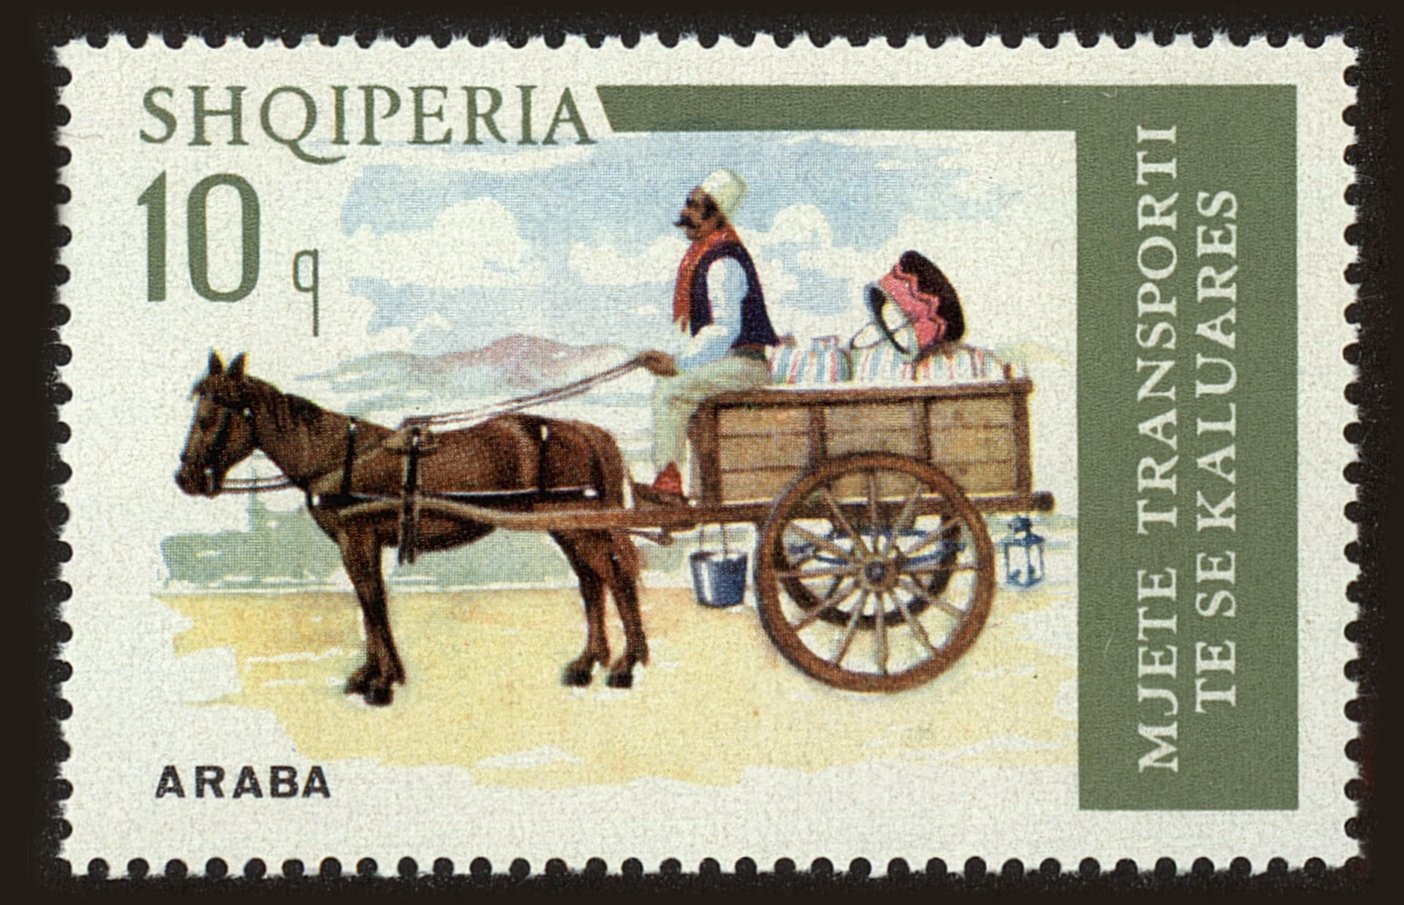 Front view of Albania 1662 collectors stamp